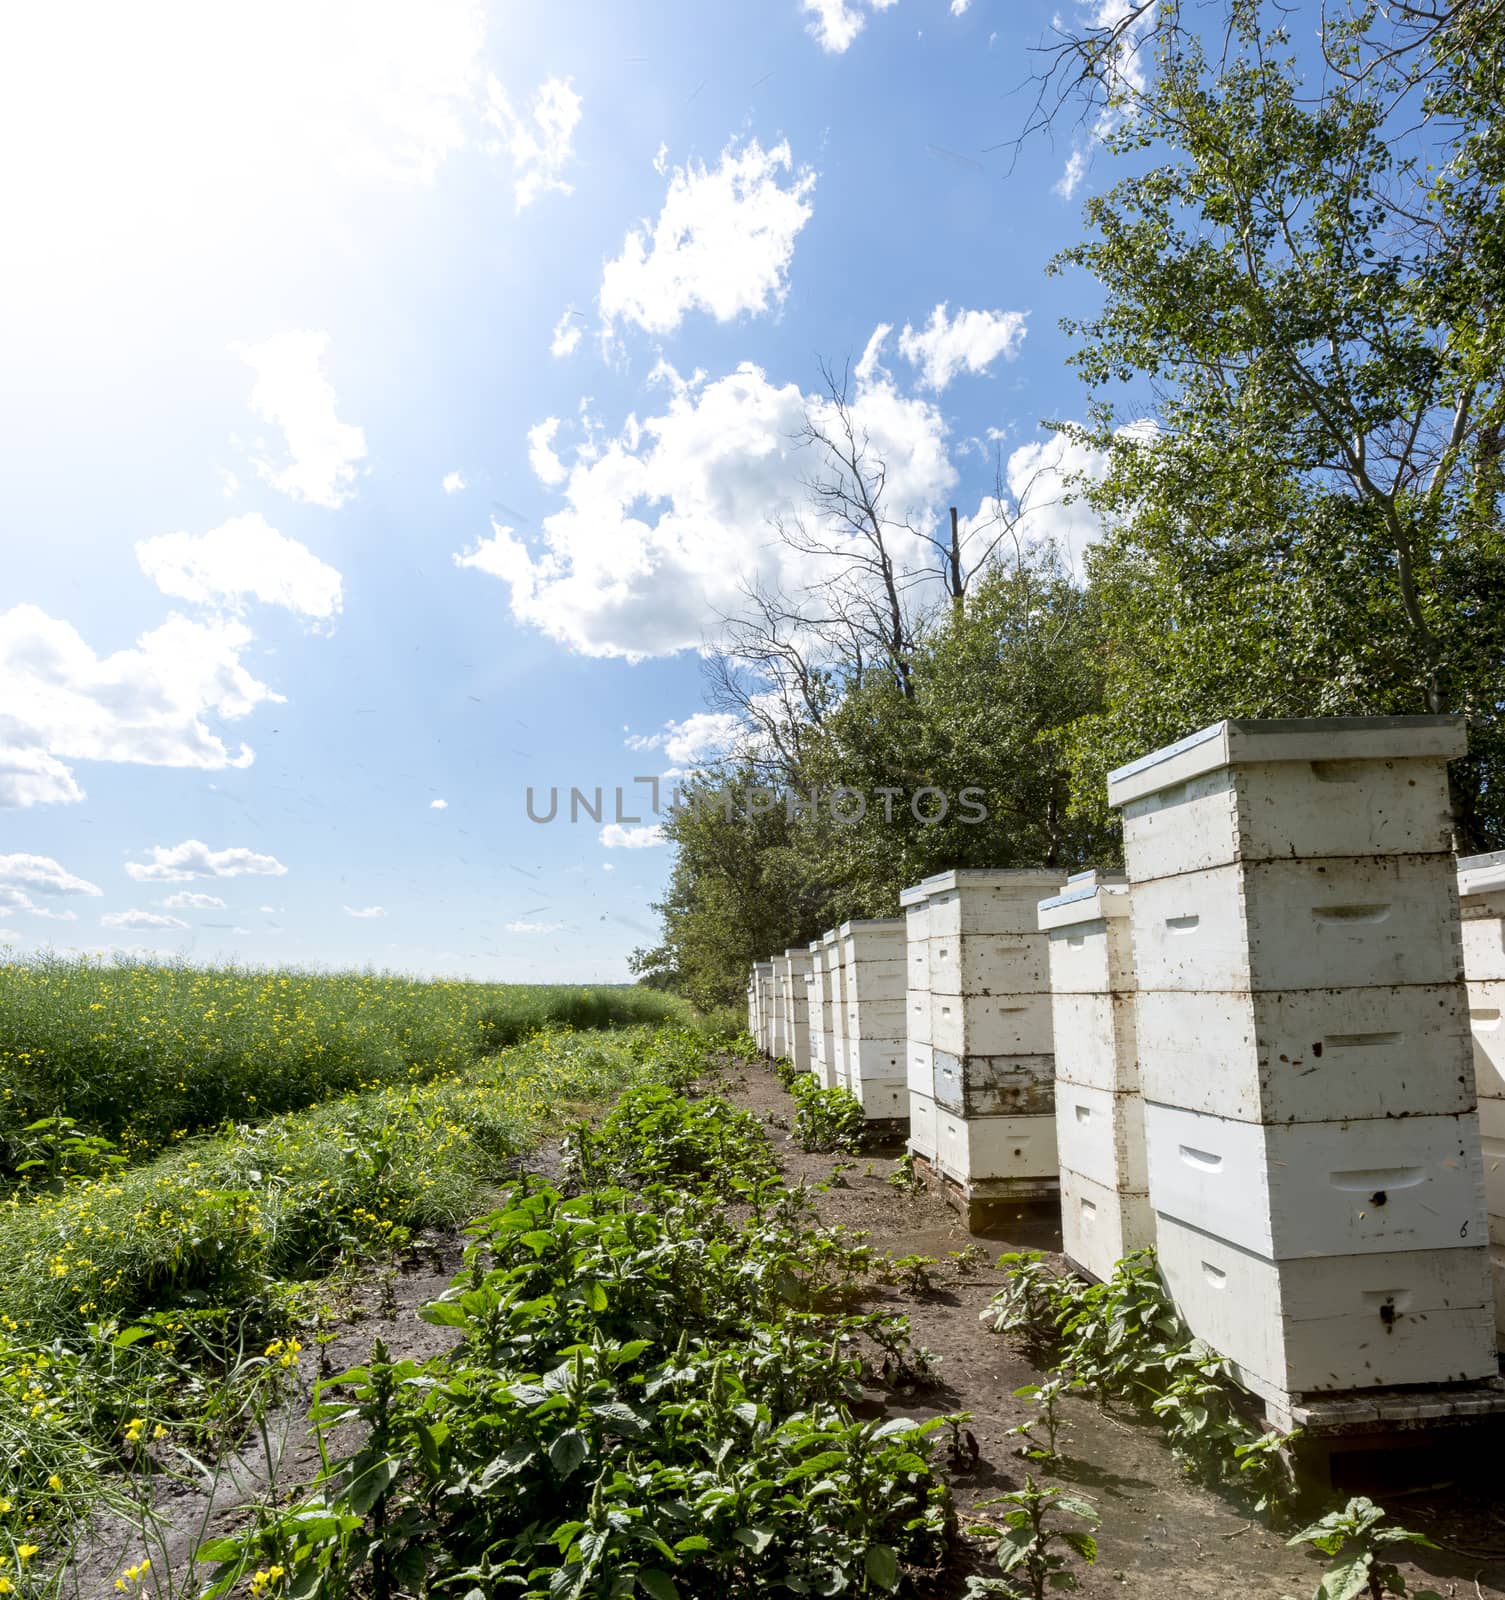 Bee hives on the edge of a farm field by TSLPhoto